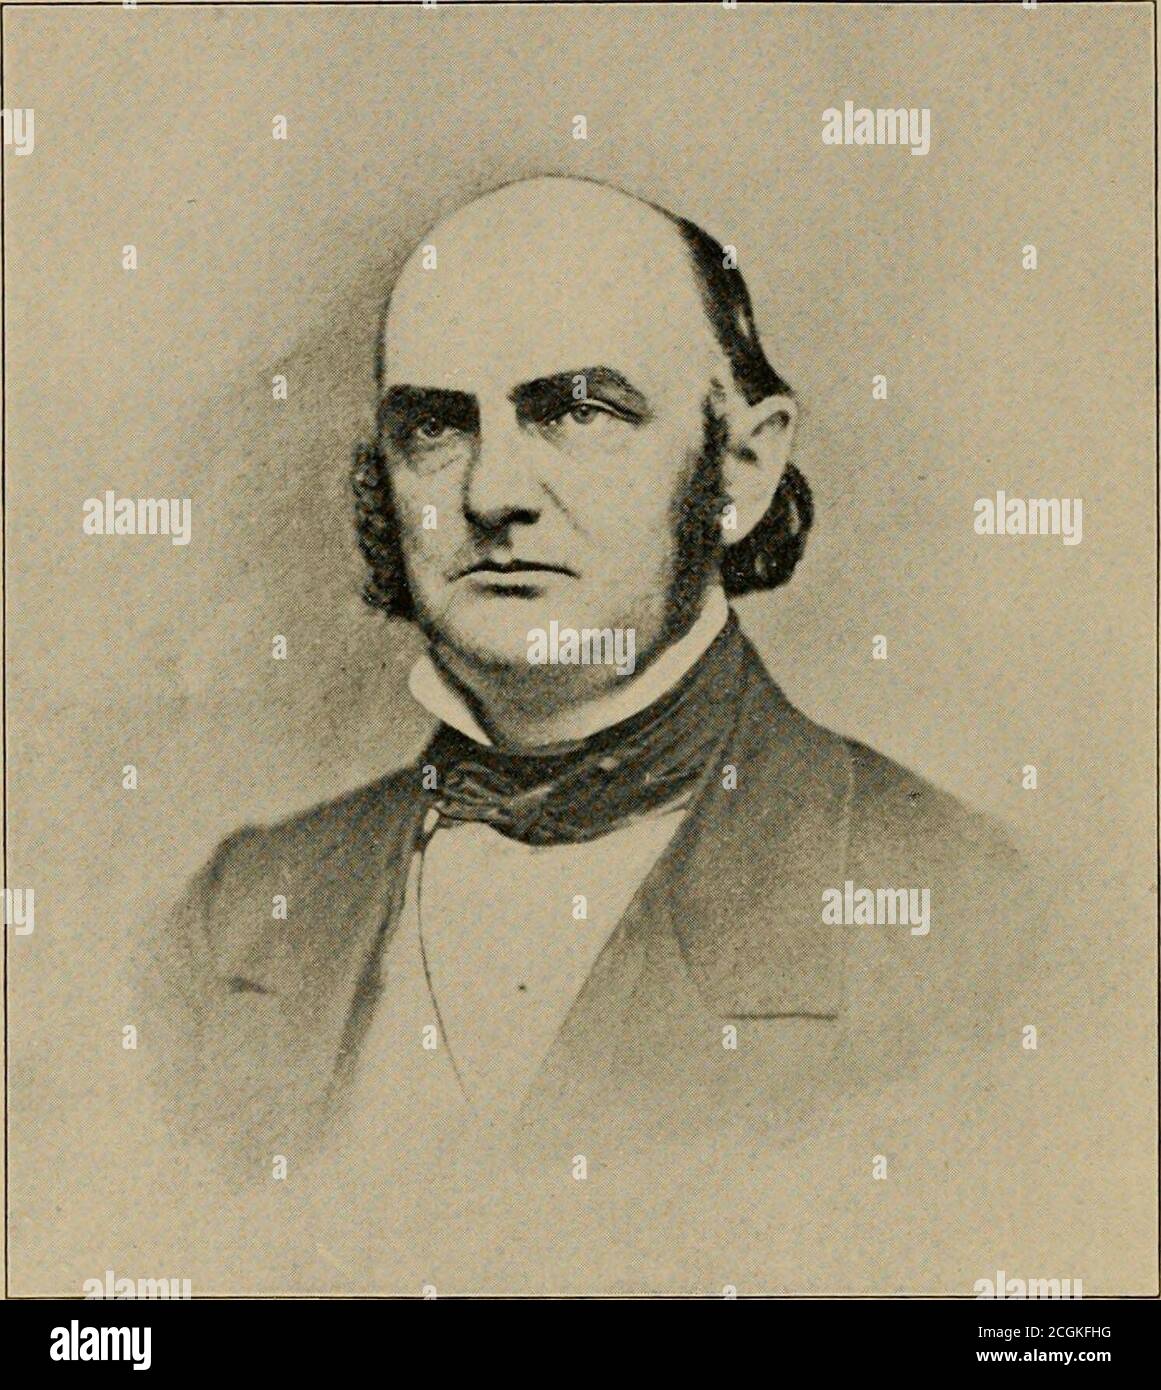 . Civil War messages and proclamations of Wisconsin war governors . Governor Alexander W. Randall From a photograph taken during the War Wisconsin History Commission: Reprints, No. a /^i-^OTHf^ • ■. ■&gt;-. ■ f?^- CIVIL WAR MESSAGES AND PROCLAMATIONS OF WISCONSIN WAR GOVERNORS EDITED BY REUBEN GOLD THWAITE5 In collaboration with Asa Currier Tilton and Frederick Mer*.. WISCONSIN HISTORY COMMISSIONDECEMBER, 1912 TWENTY-FIVE HUNDRED COPIES PRINTED Copyright, 1912THE WISCONSIN HISTORY COMMISSION (in behalf of the State of Wisconsin) Opinions or errors of fact on the part of the respective authors Stock Photo